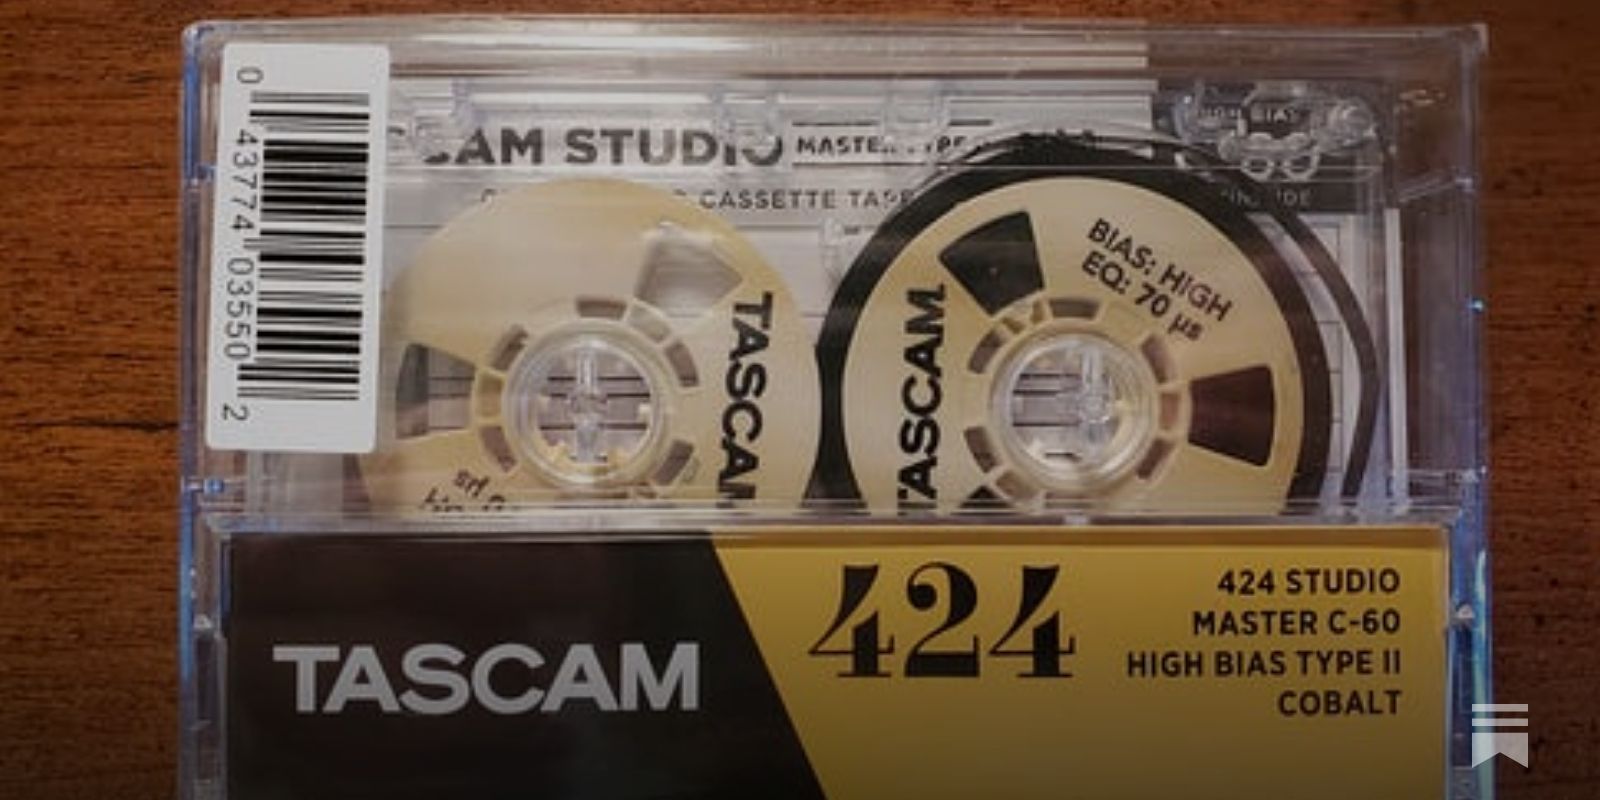 NIMBYism, Cassette Tapes, Nostalgia, and the Future